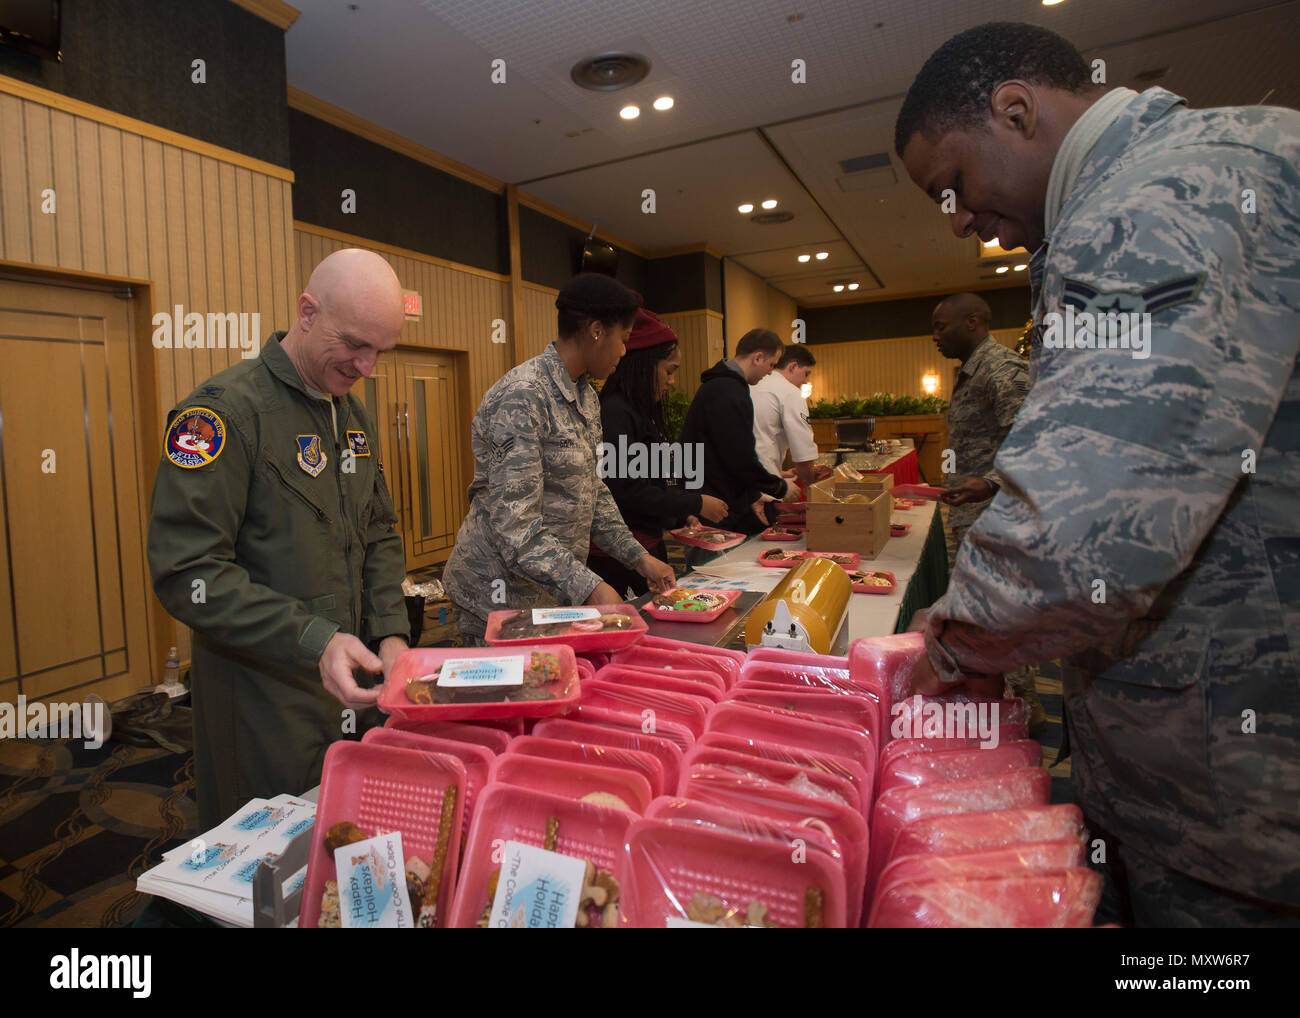 U.S. Air Force Col. R. Scott Jobe, 35th Fighter Wing commander, assists Airmen package cookies during the annual Cookie Caper event at Misawa Air Base, Japan, Dec. 7, 2016.  Preparation began two days prior when volunteers baked donated dough at the Commissary and collected baked cookies from around the Misawa community for packaging. (U.S. Air Force photo by Senior Airman Deana Heitzman) Stock Photo